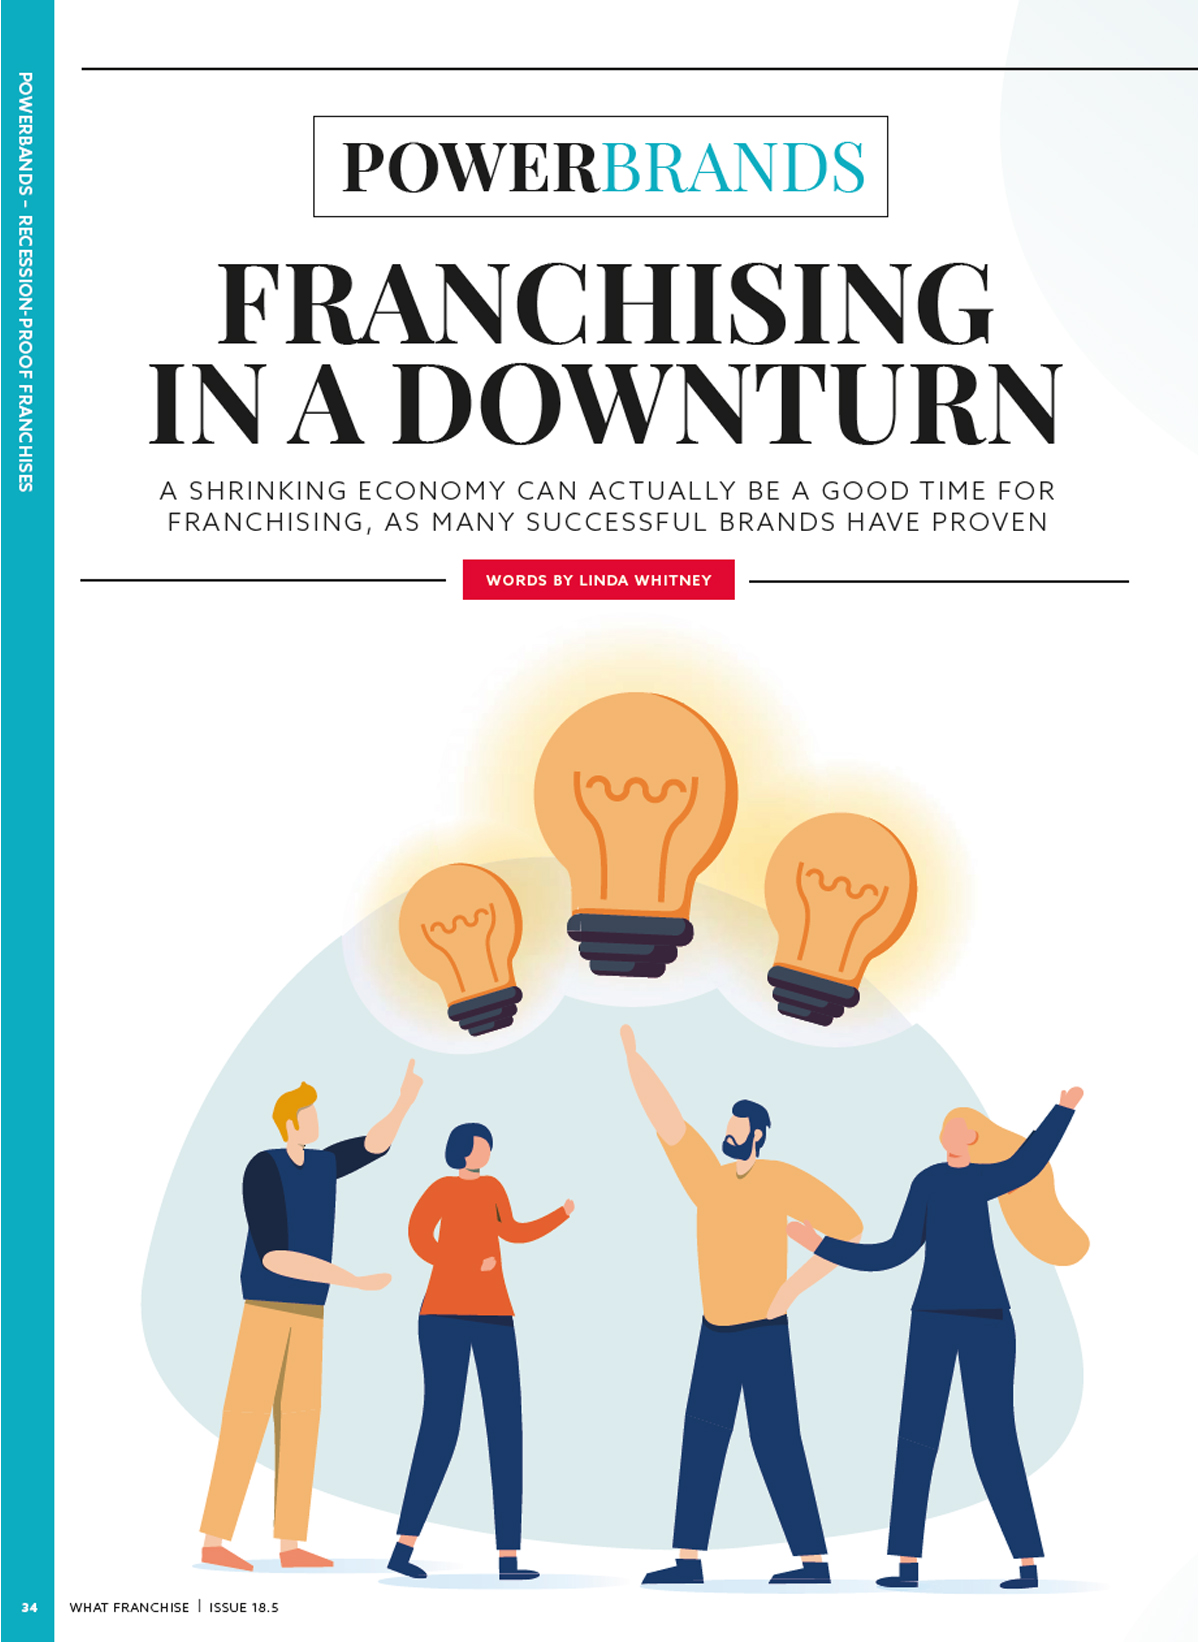 Power Brands: Franchising in a downturn